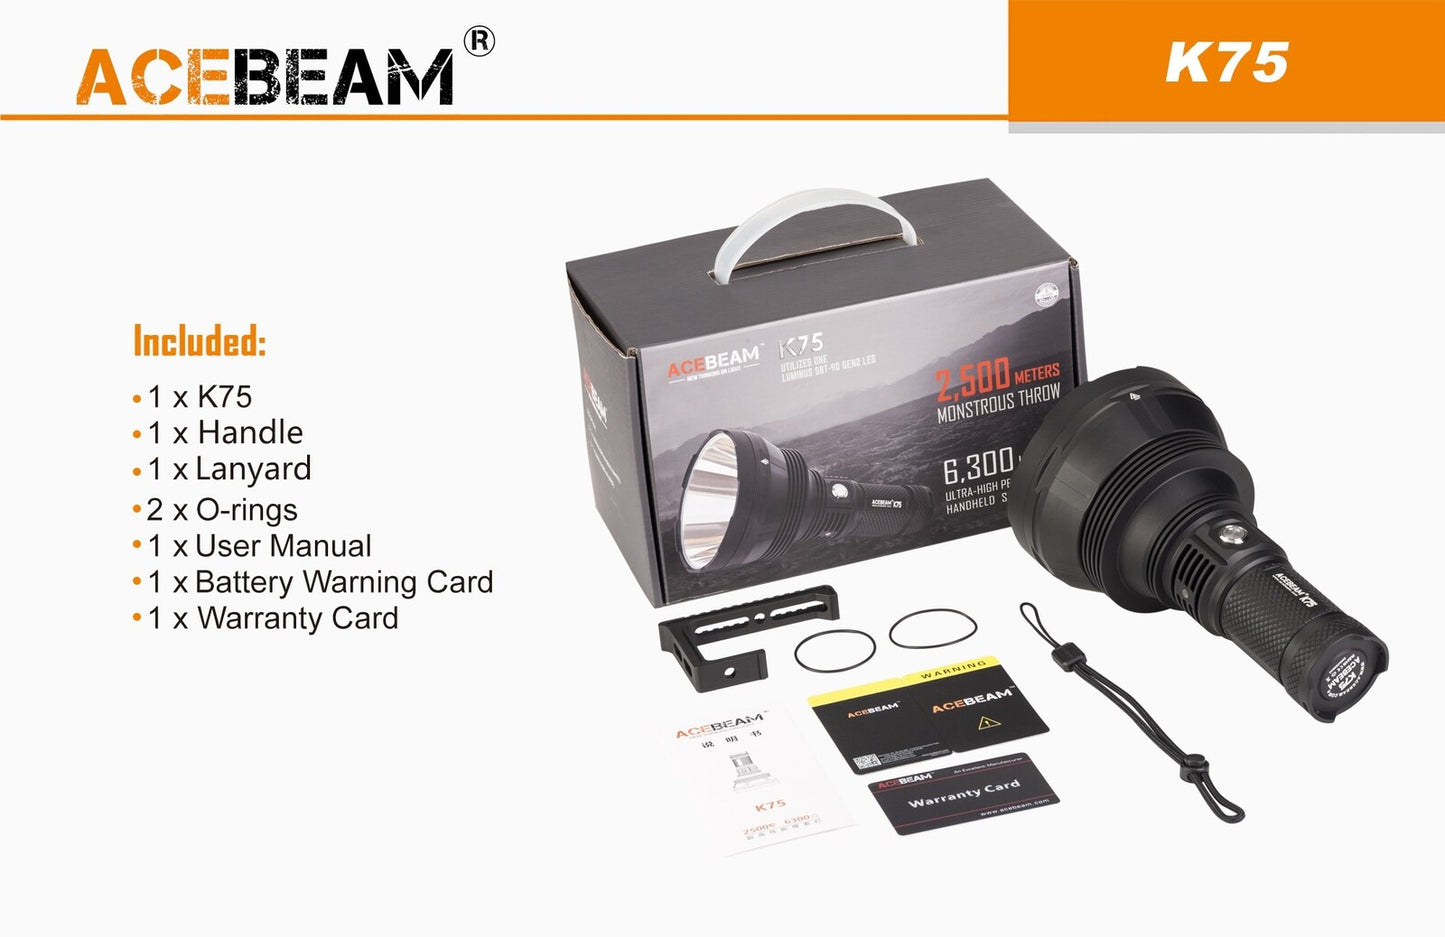 Acebeam Ultra Throw Handheld Led Searchlight - 6300 Lumens 2500 M Red #k75-Red